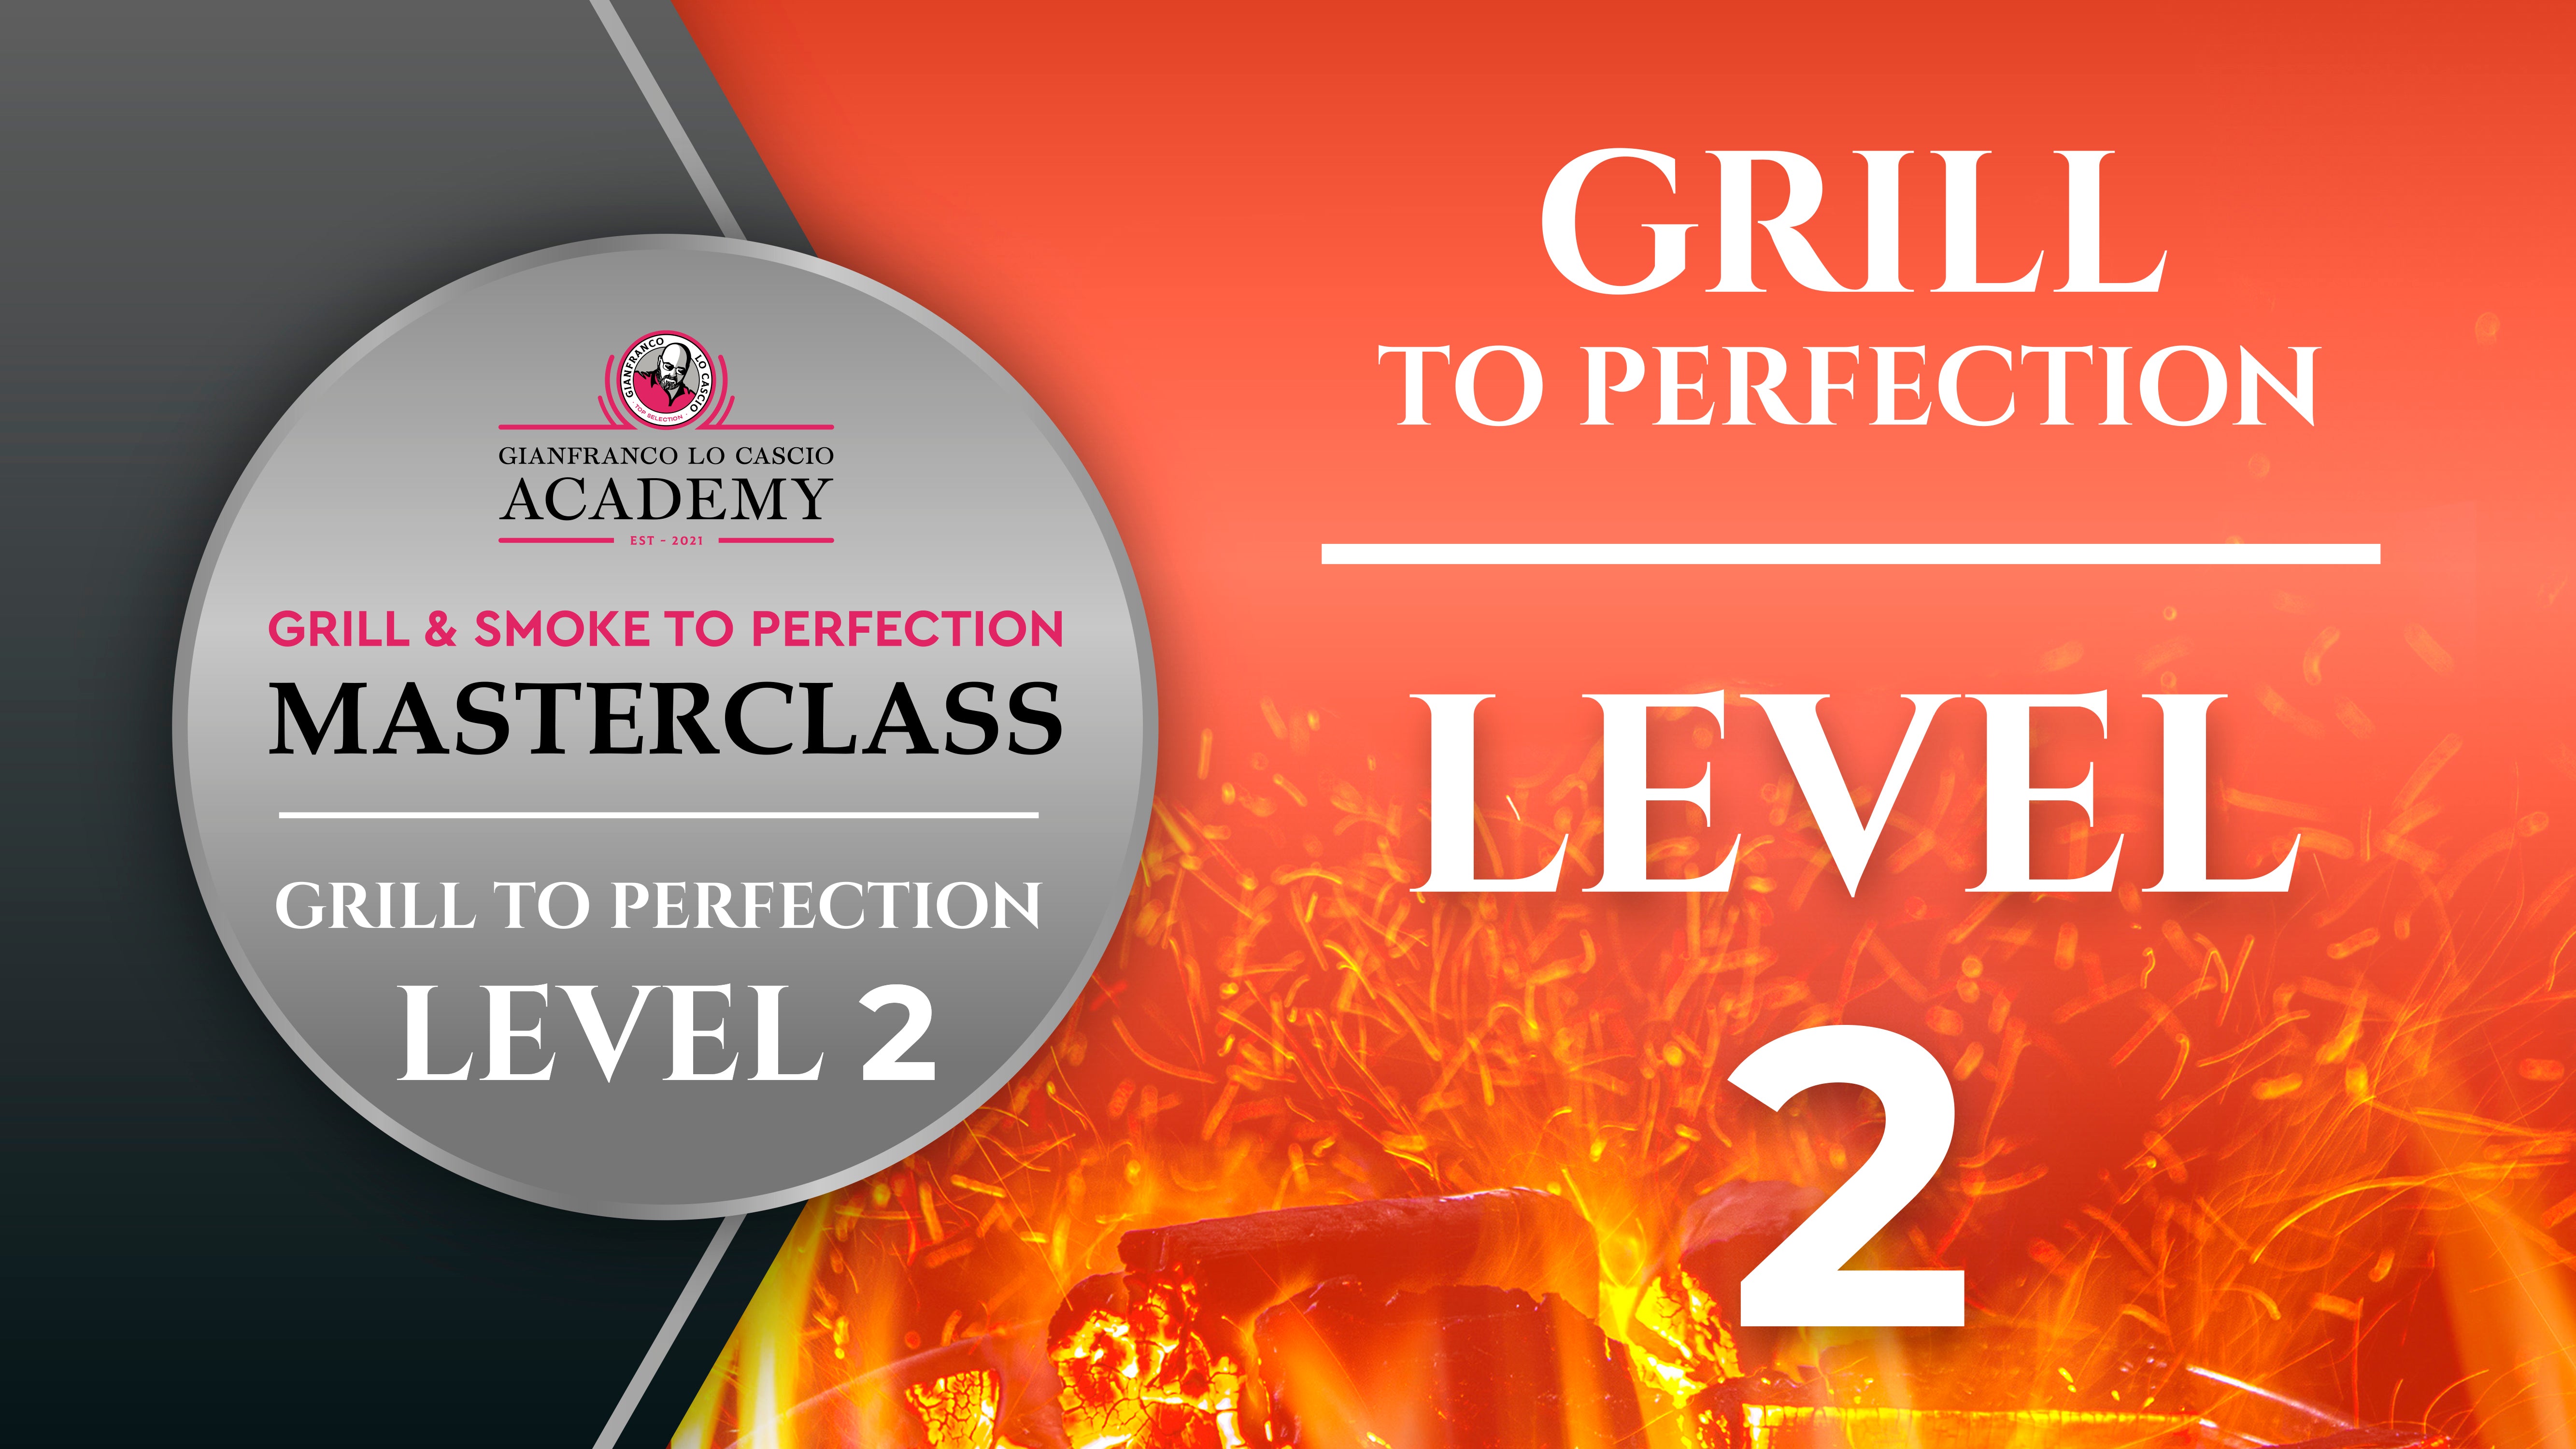 Grill to Perfection - Level 2 - Video Masterclass GLC Academy